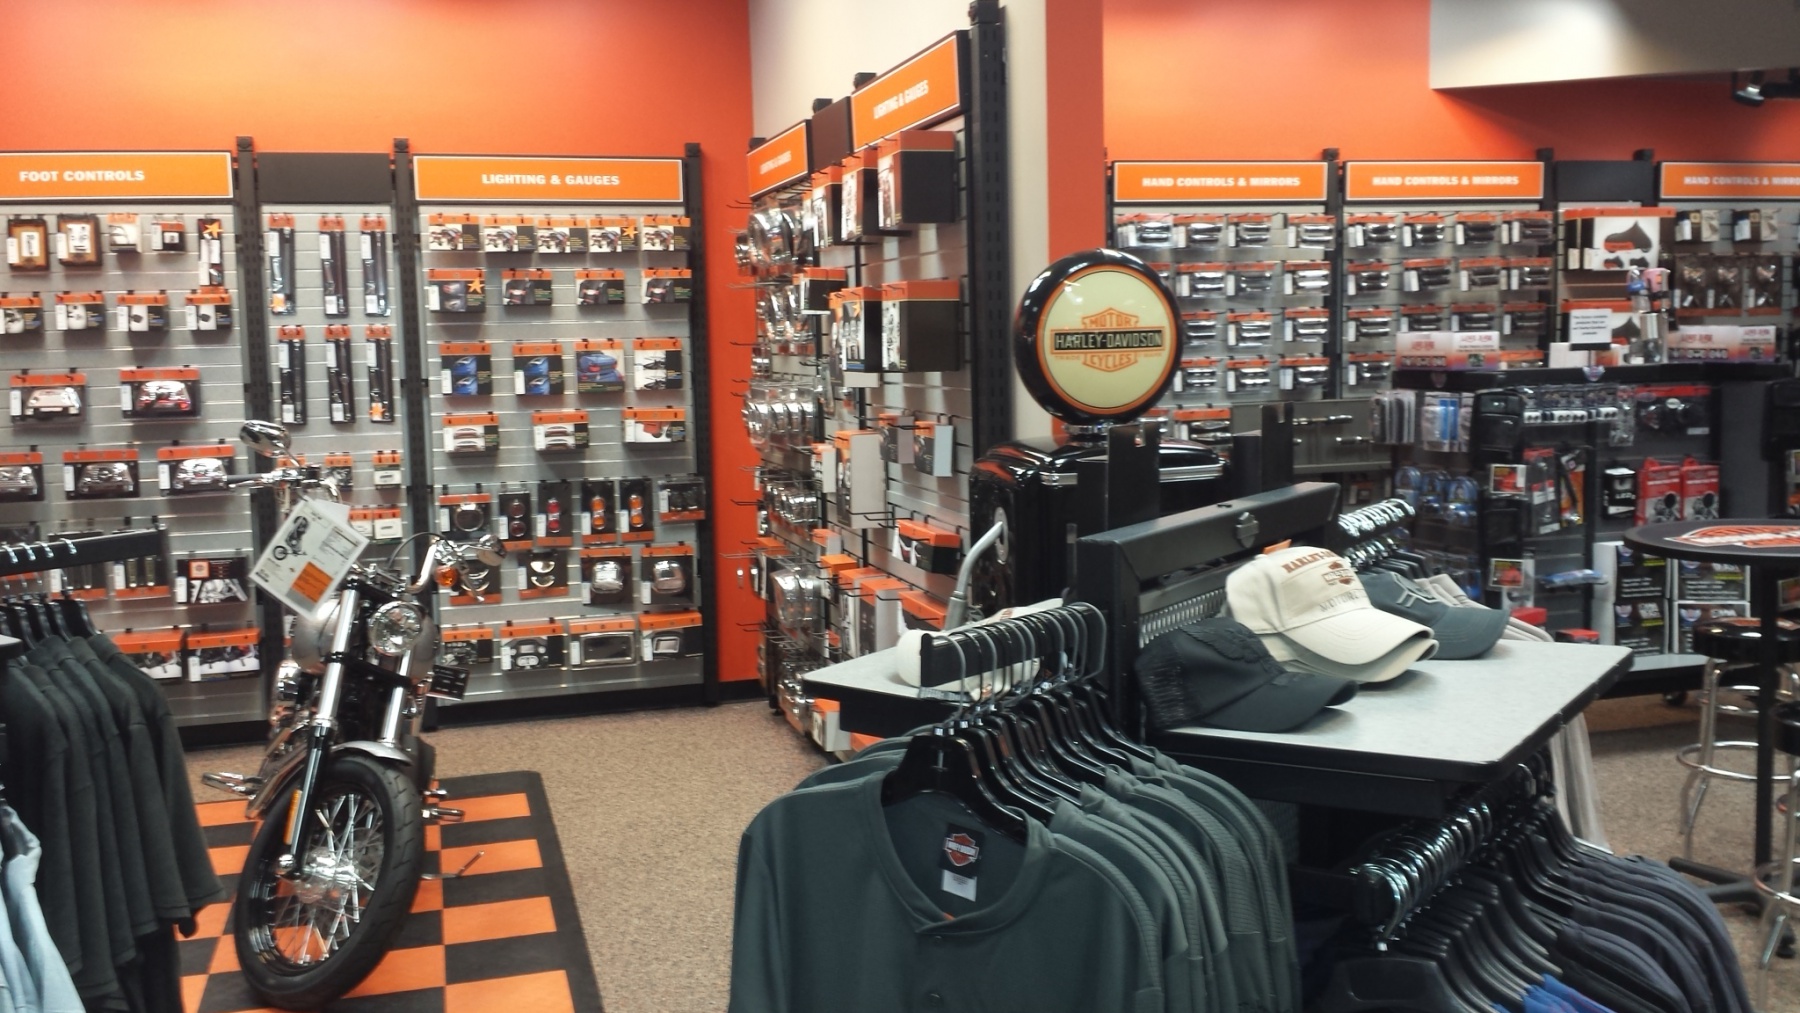 Nationwide Fixture Installations Inc Harley Davidson Case Study New Store Installation Millwork Packages Retail Rollouts Maintenance Program Management Signage